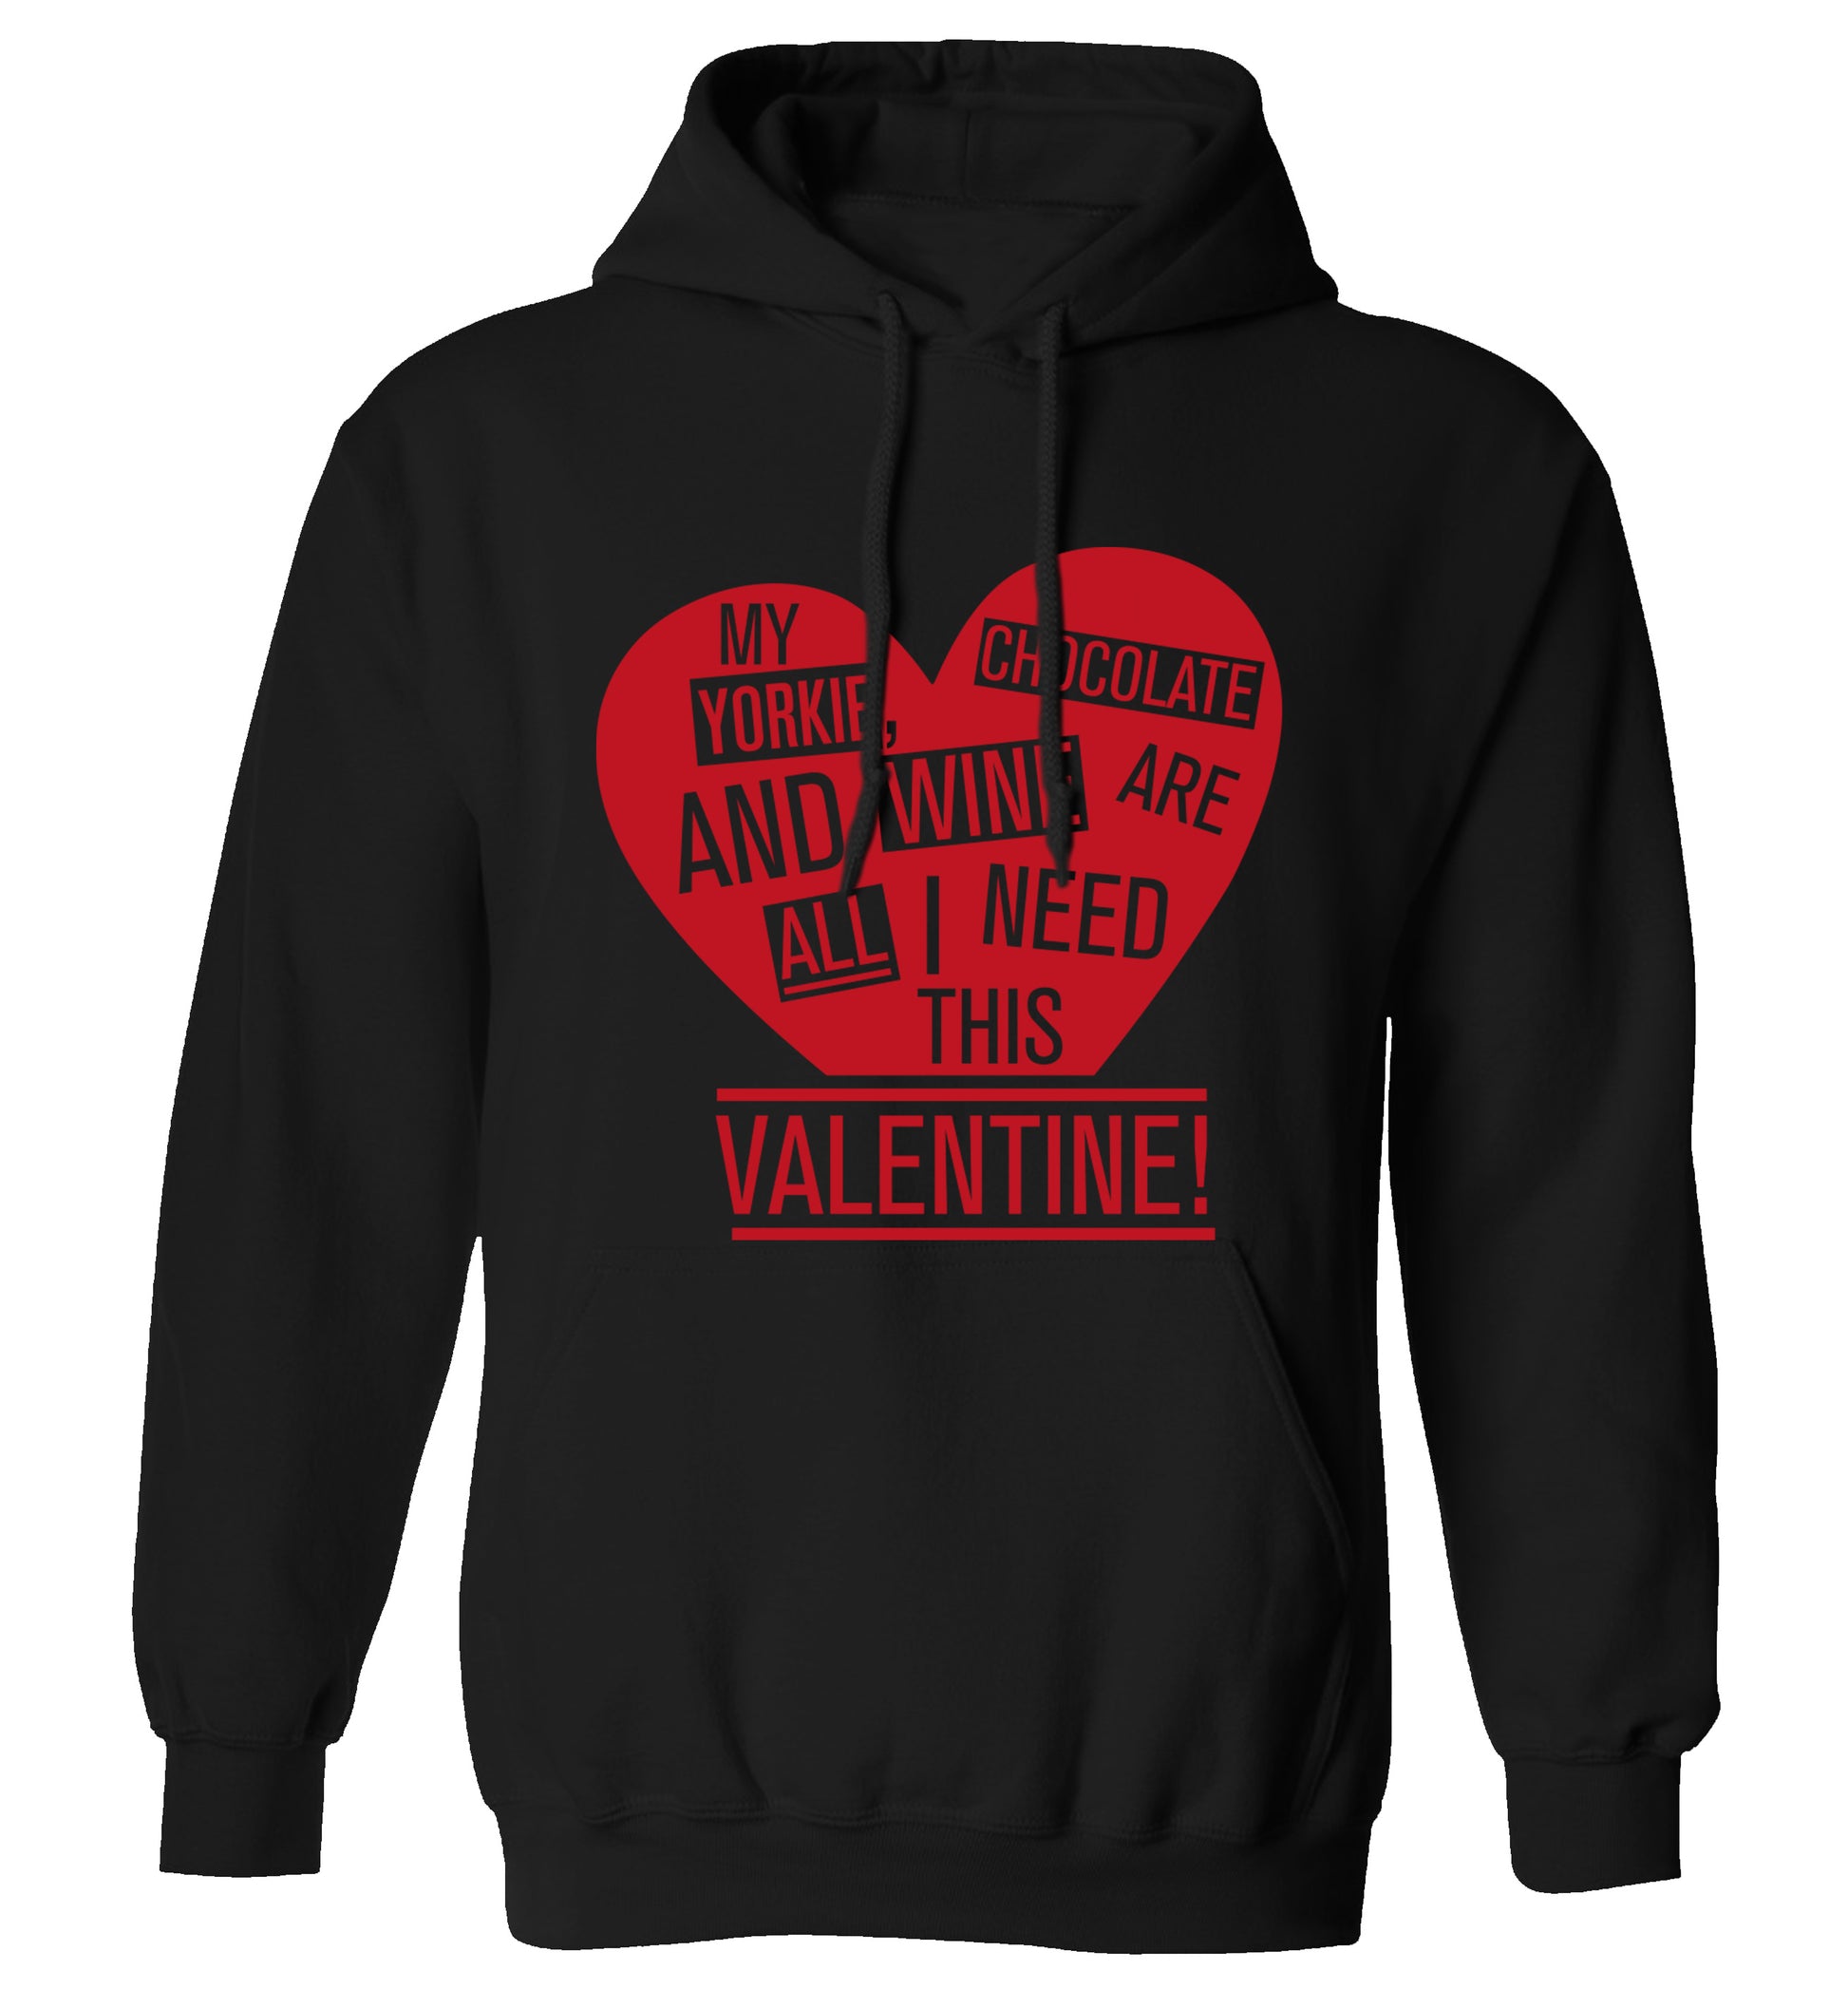 My yorkie, chocolate and wine are all I need this valentine! adults unisex black hoodie 2XL